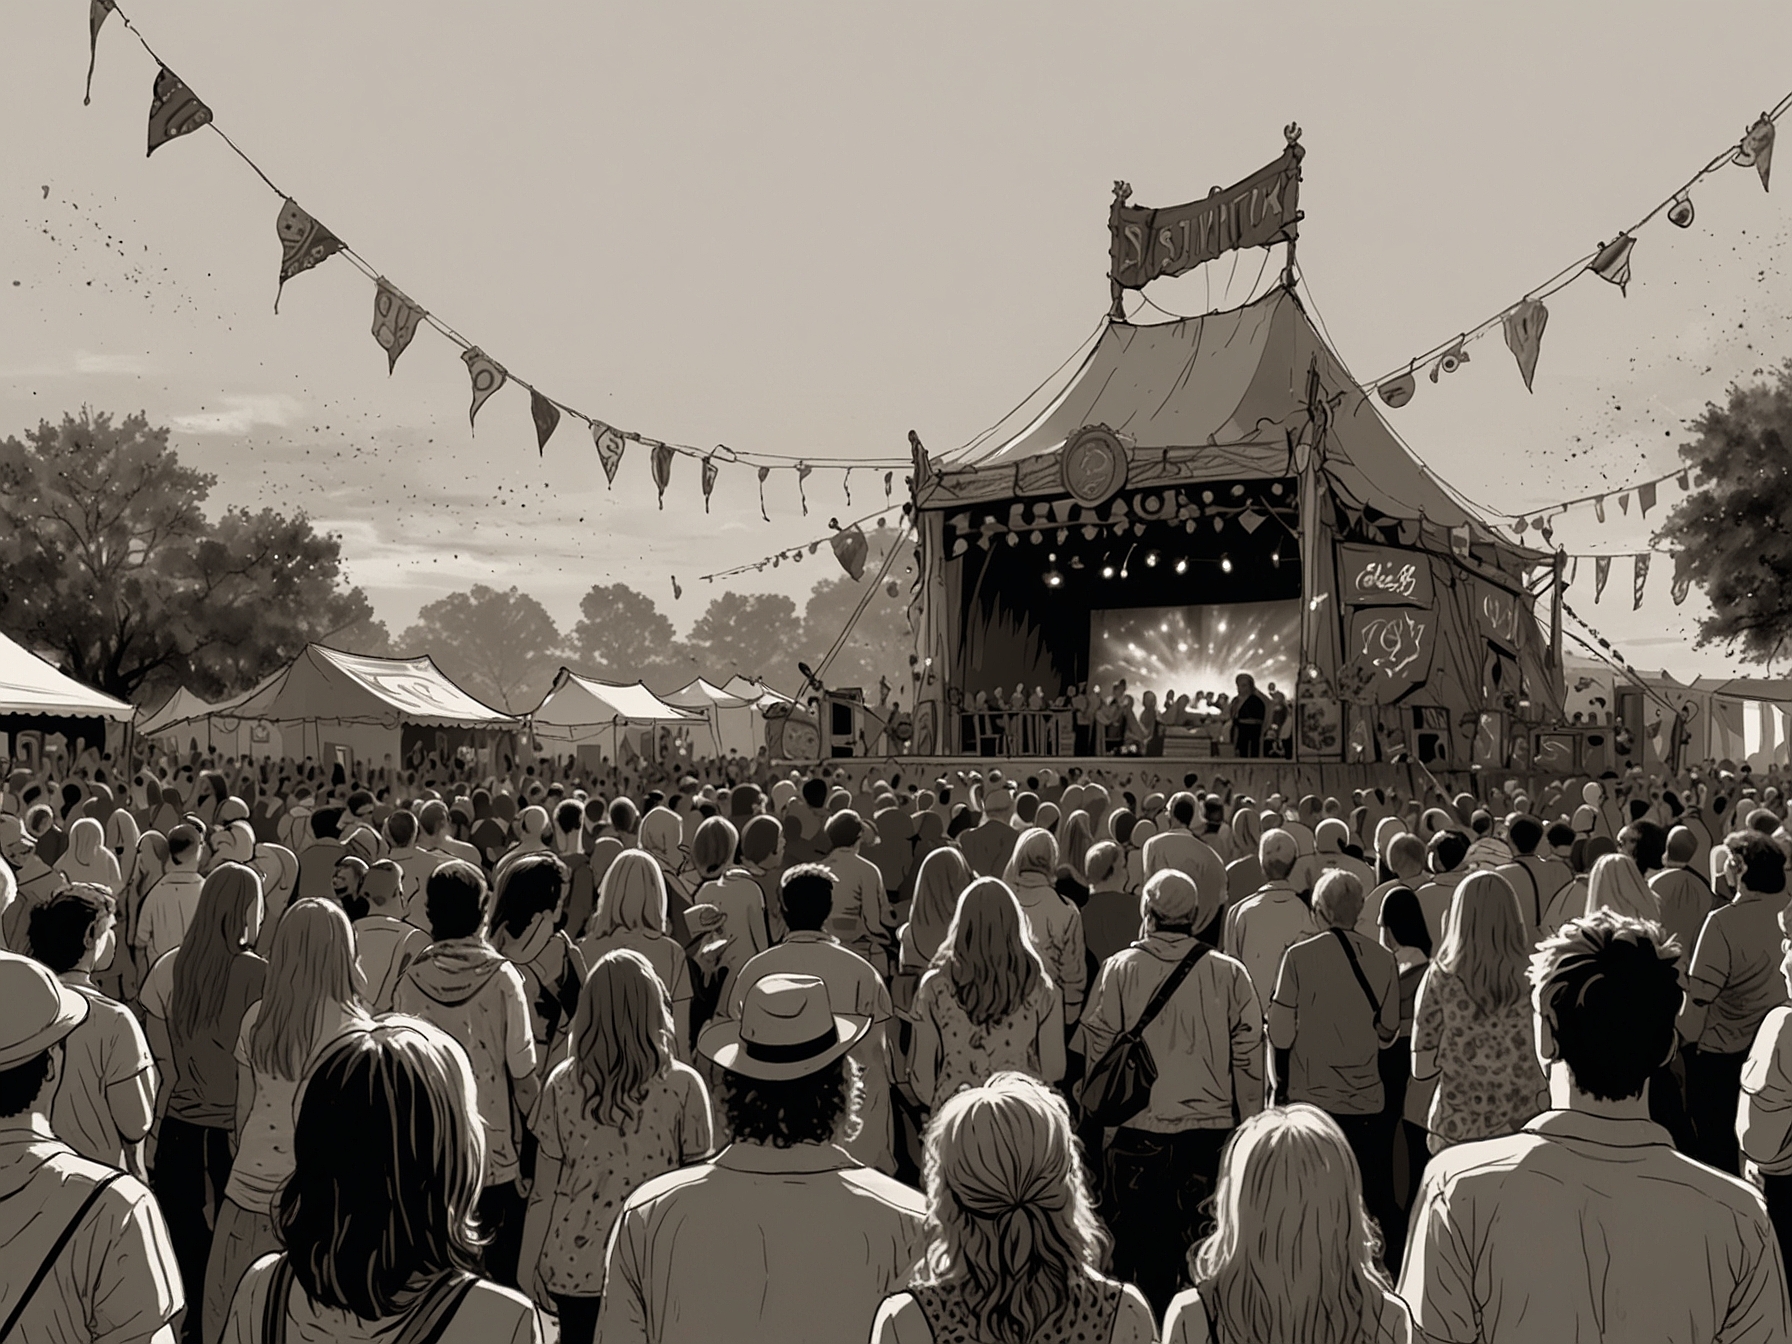 Festival-goers enjoy diverse performances across Glastonbury's stages, including iconic and intimate settings, encapsulating the spirit of unity and celebration at Worthy Farm.